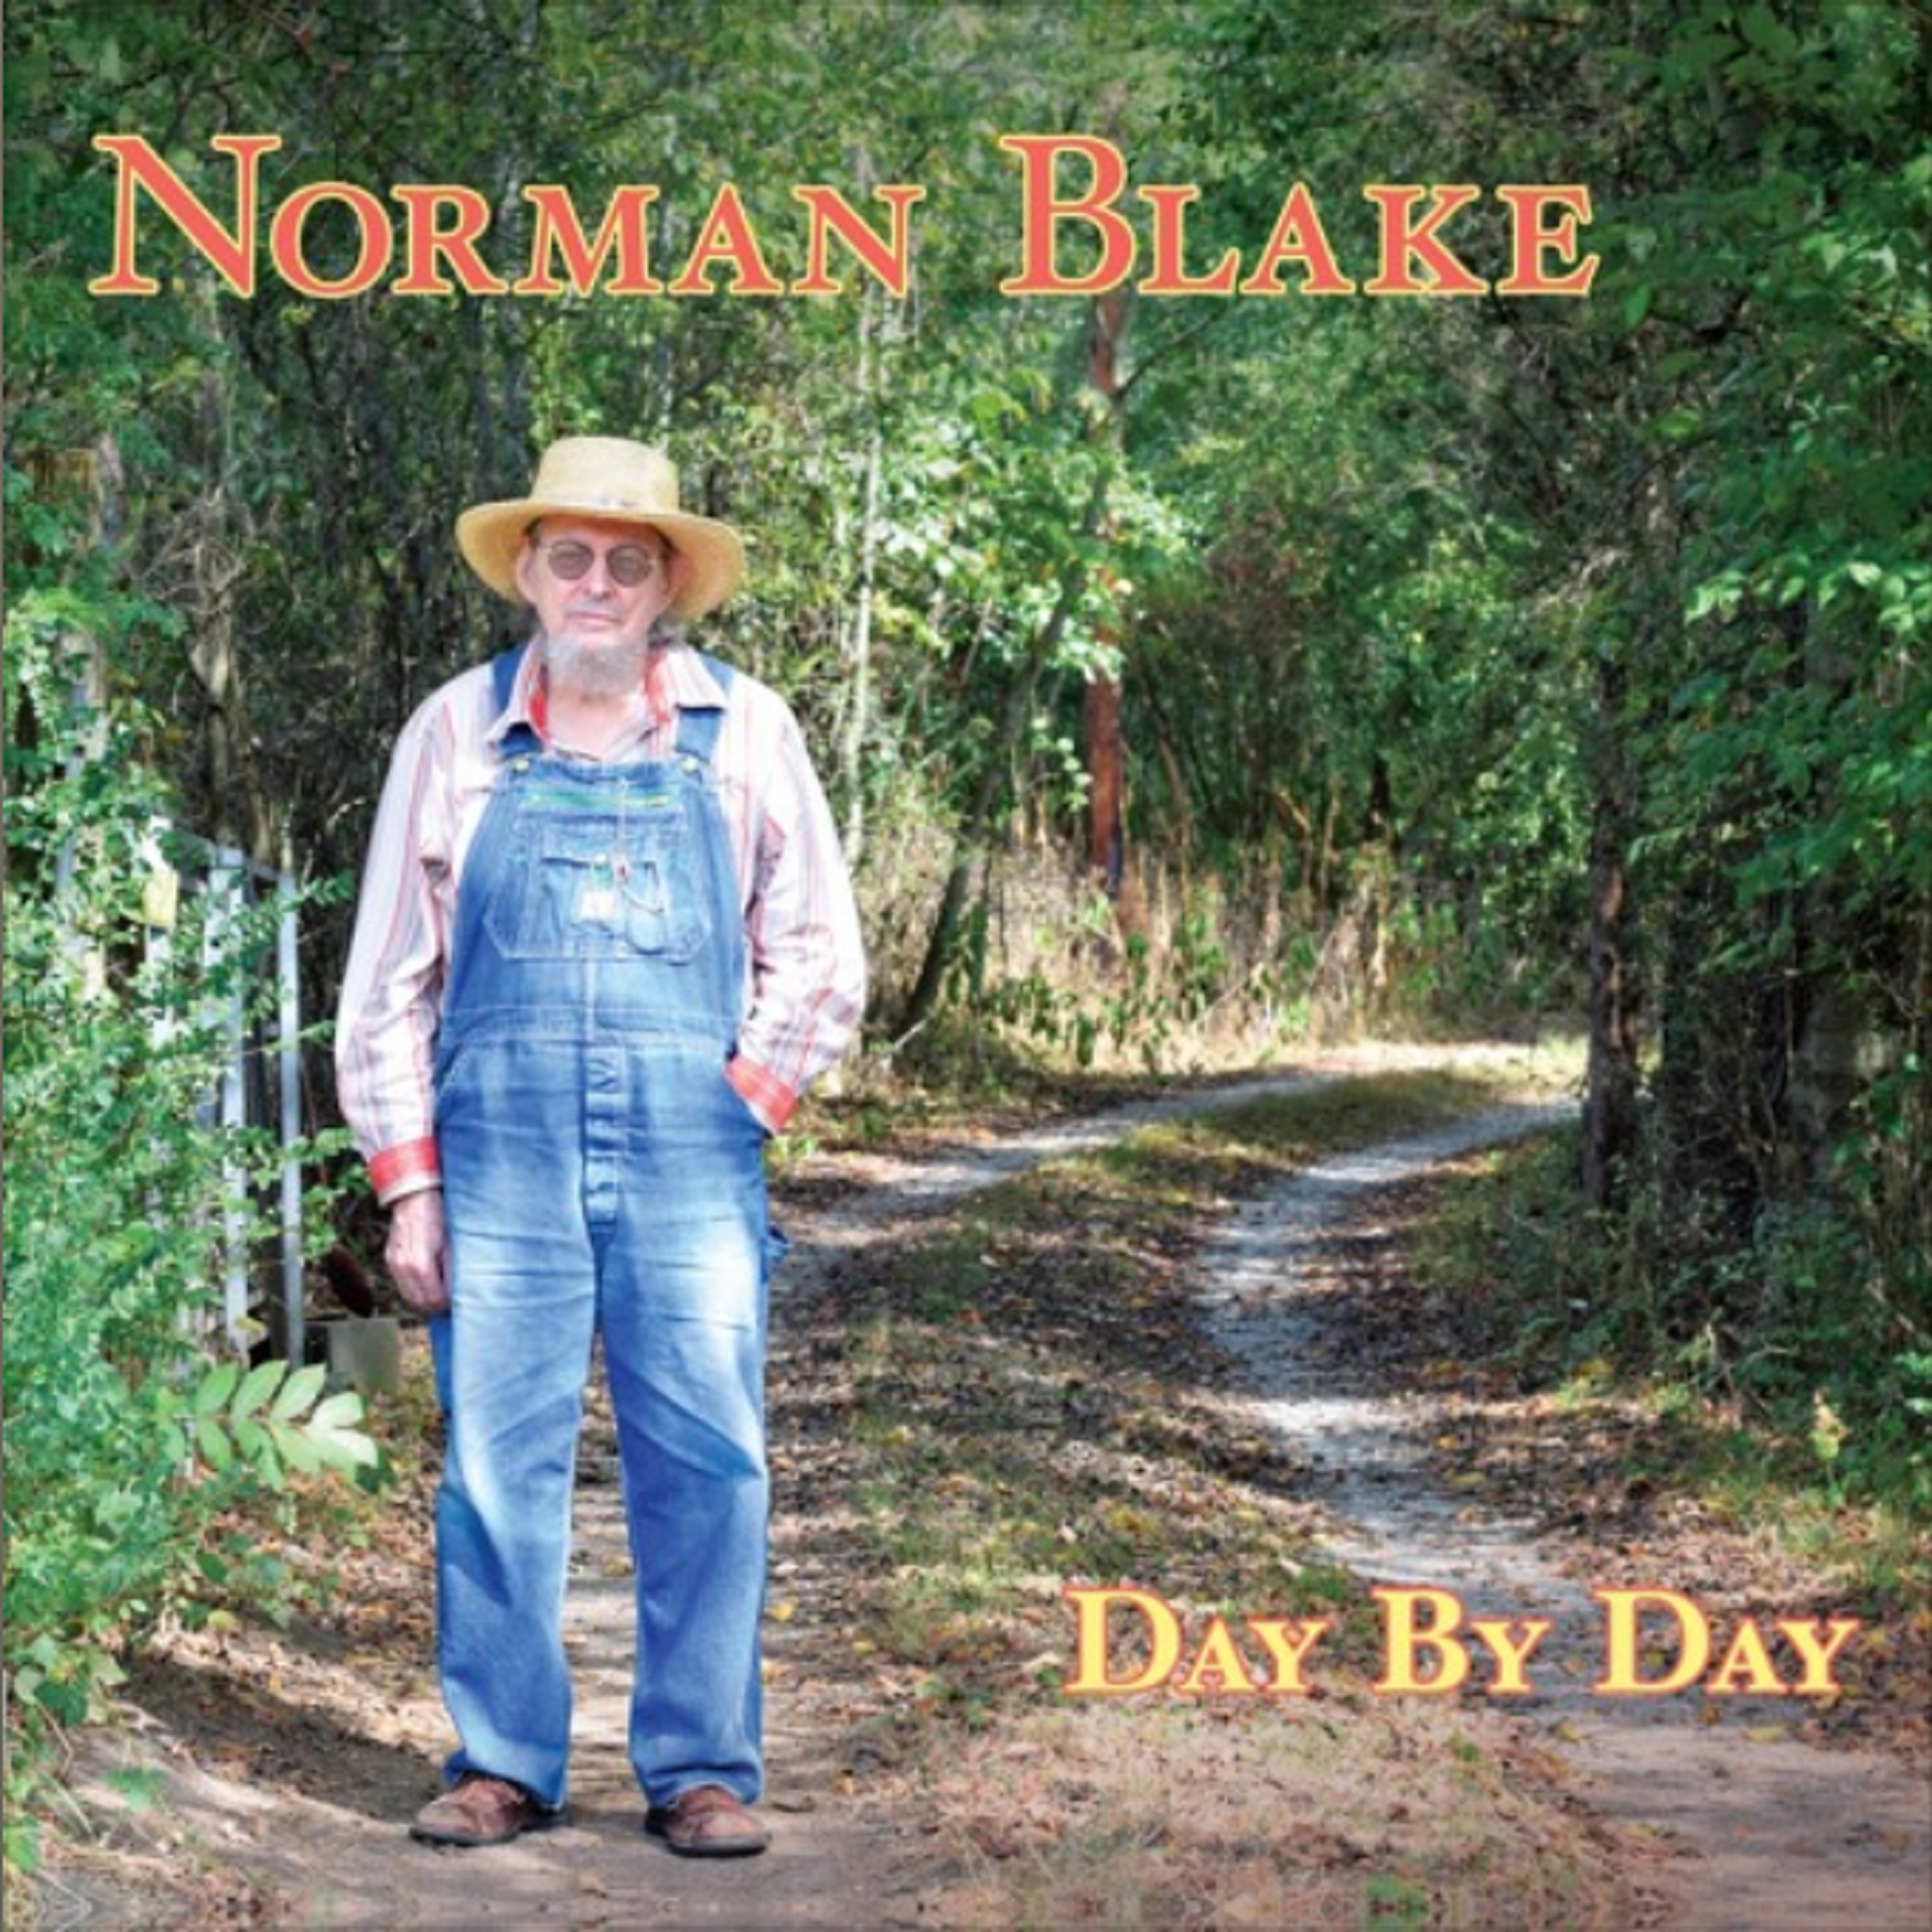 New album from American guitar legend Norman Blake coming soon